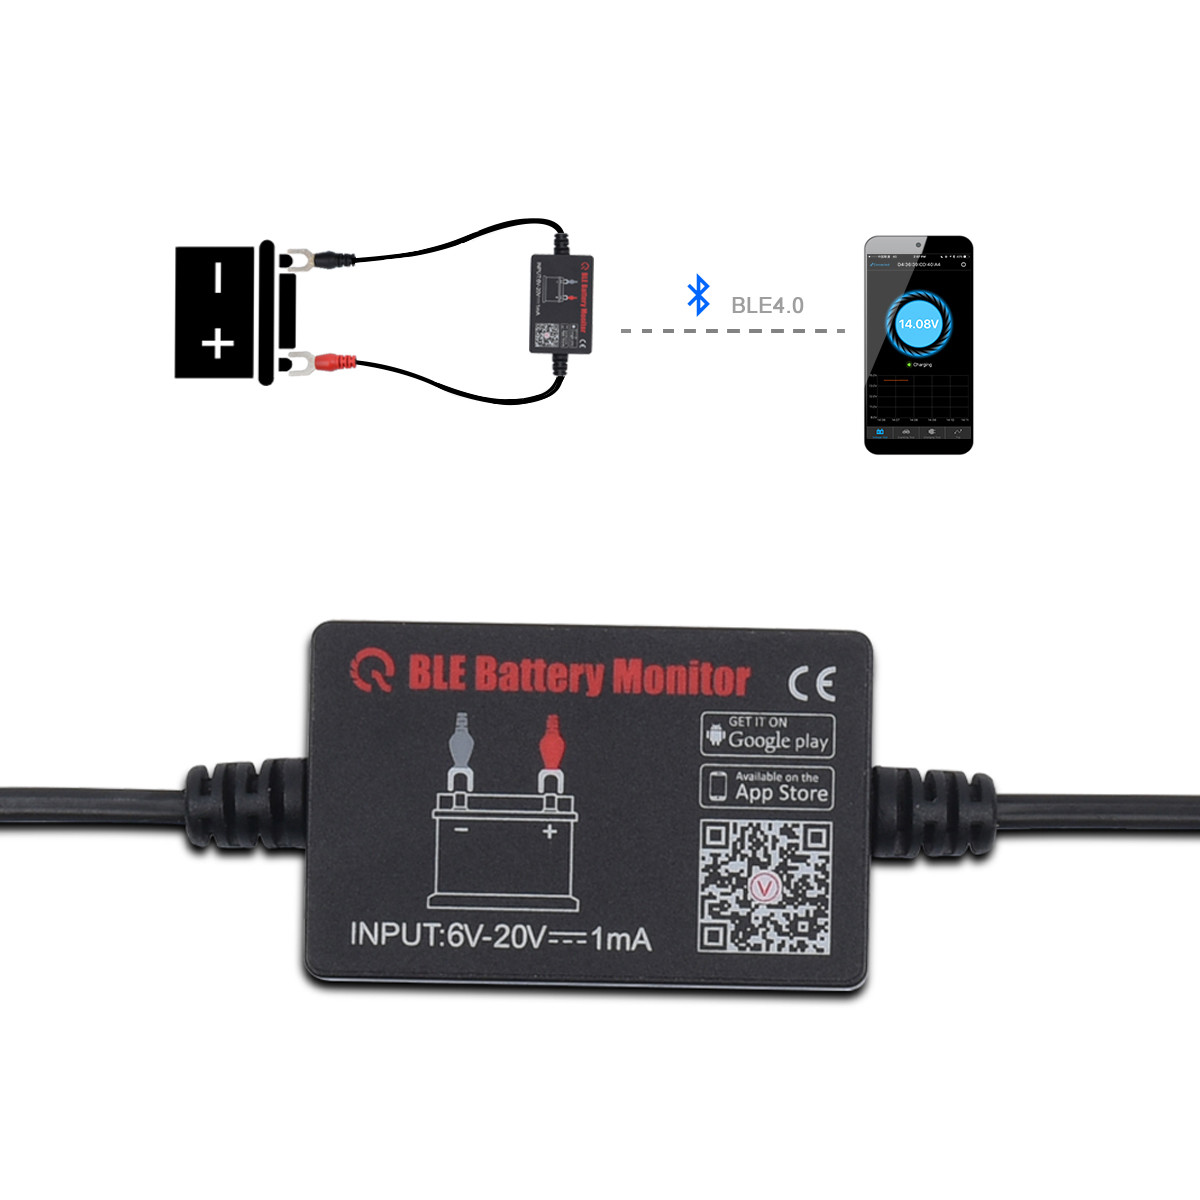 Bluetooth 4.0 Wireless Battery Tester VAG Diagnostic Tool for Android & IOS 12V Battery monitor